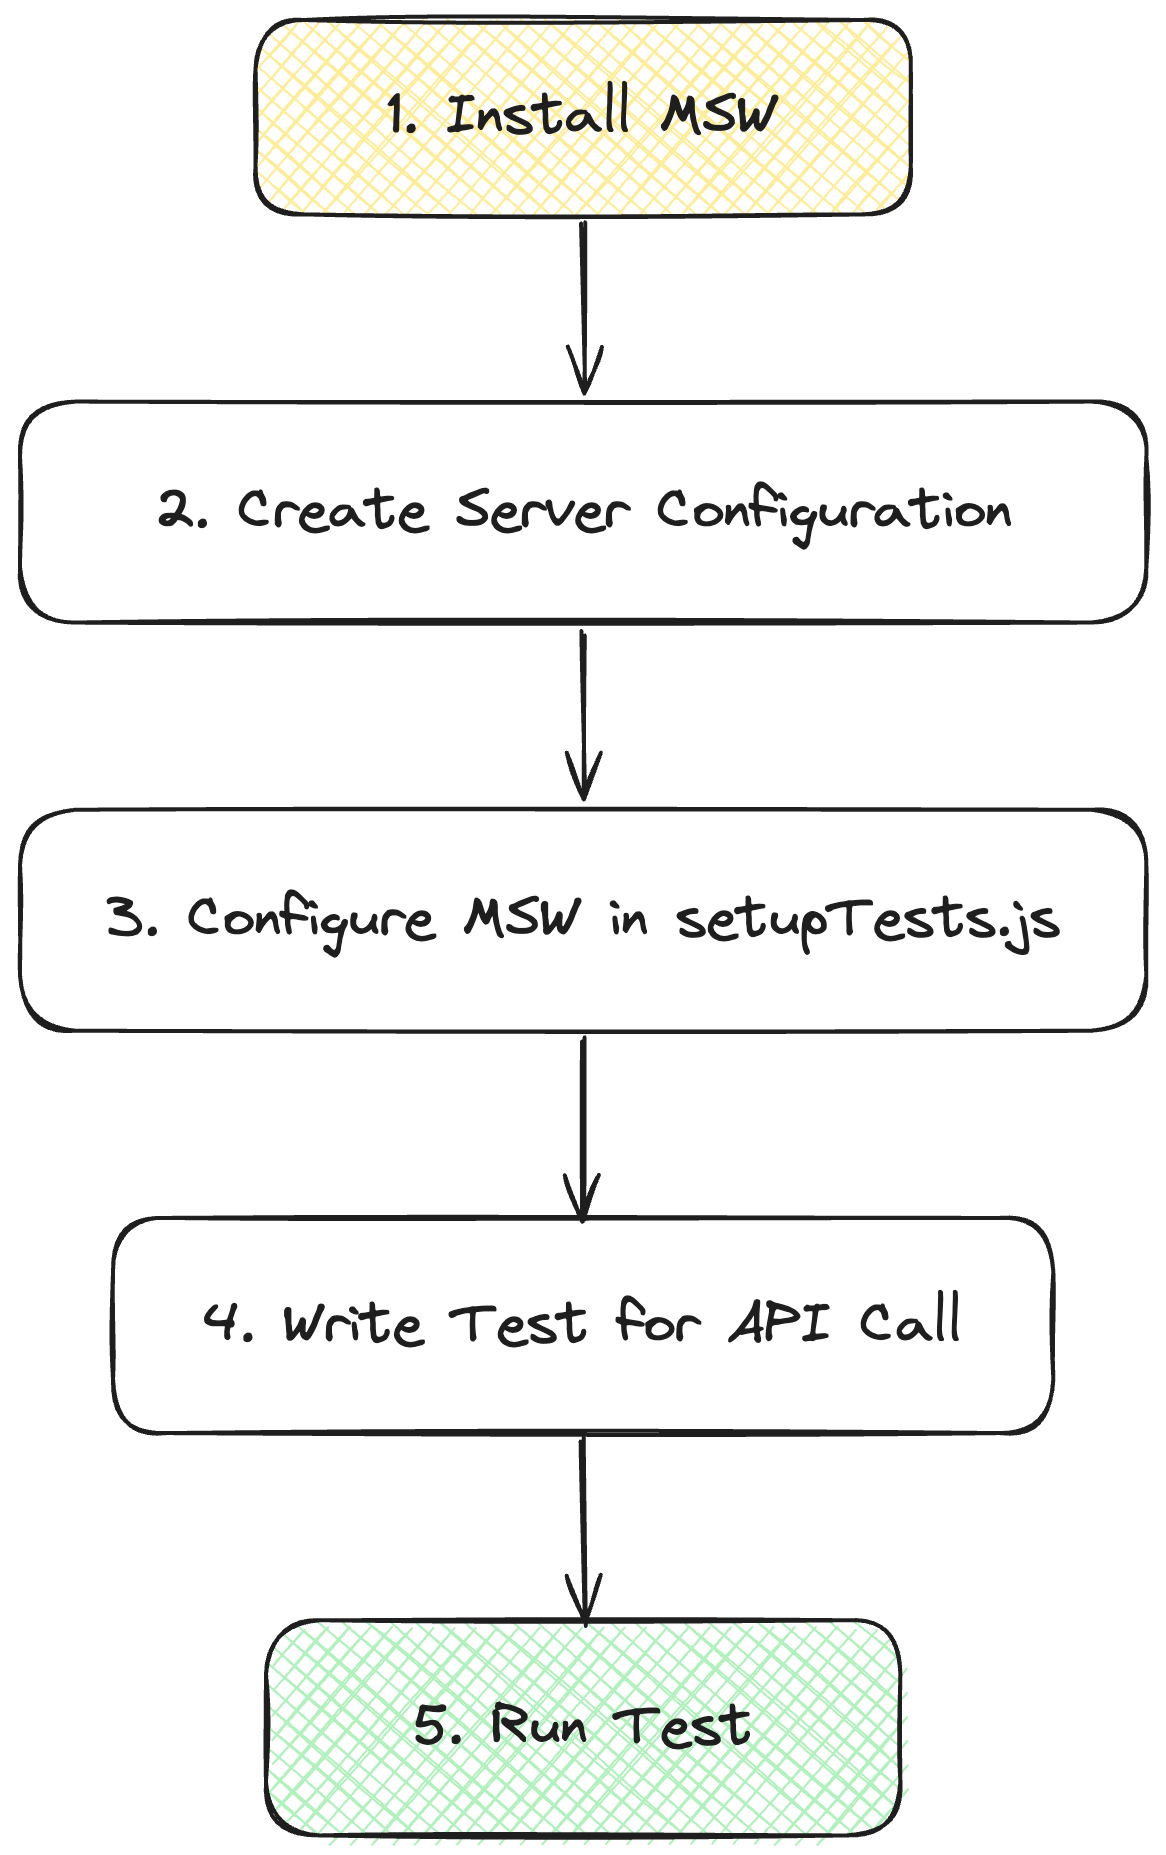 the process of setting up MSW and writing a test for an API call